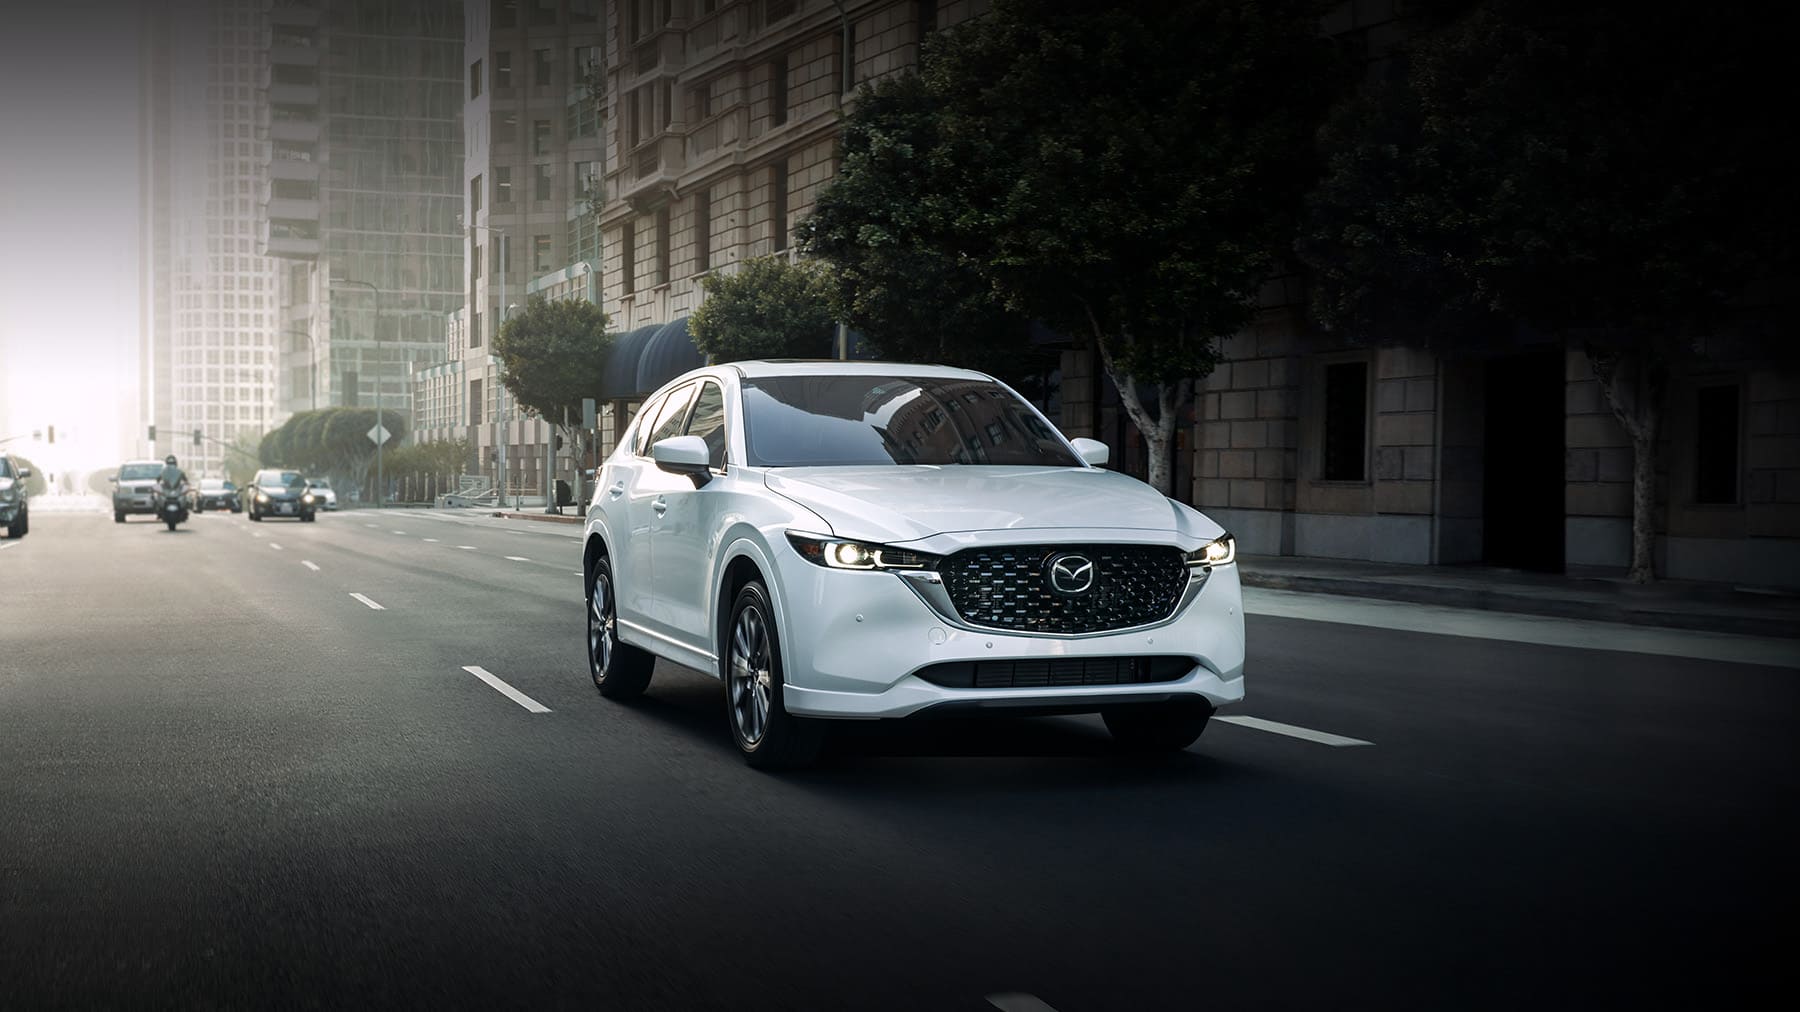 At Mazda of South Charlotte, we have a great selection of used Mazda CX 5 with unique interior features. Visit us today to find the perfect Mazda CX 5 for you!